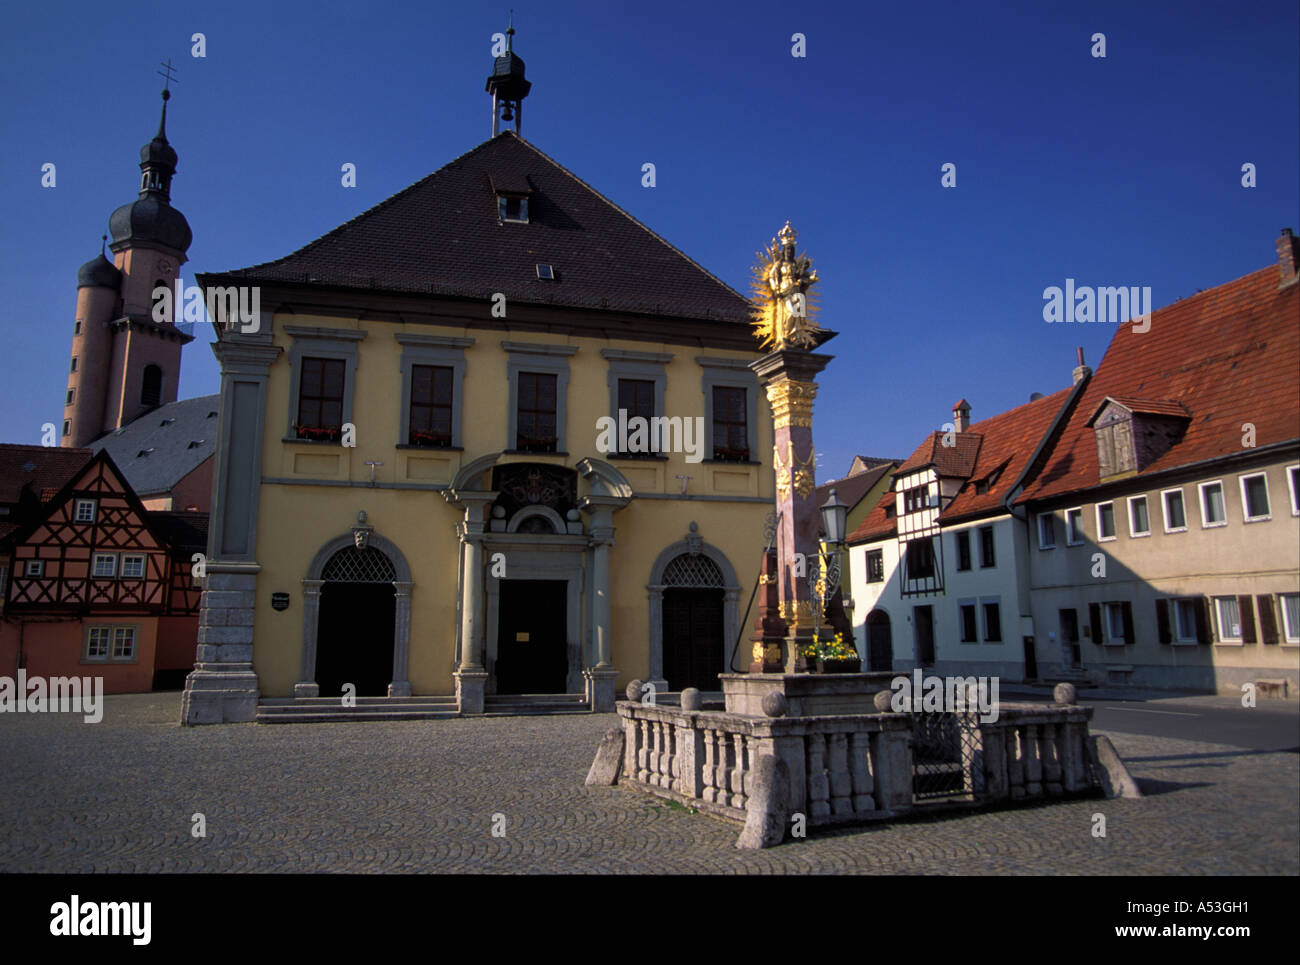 Germany: Eibelstadt on the Main river, Bavaria, with the Maria-column, town hall and Nikolaus-church in BG Stock Photo